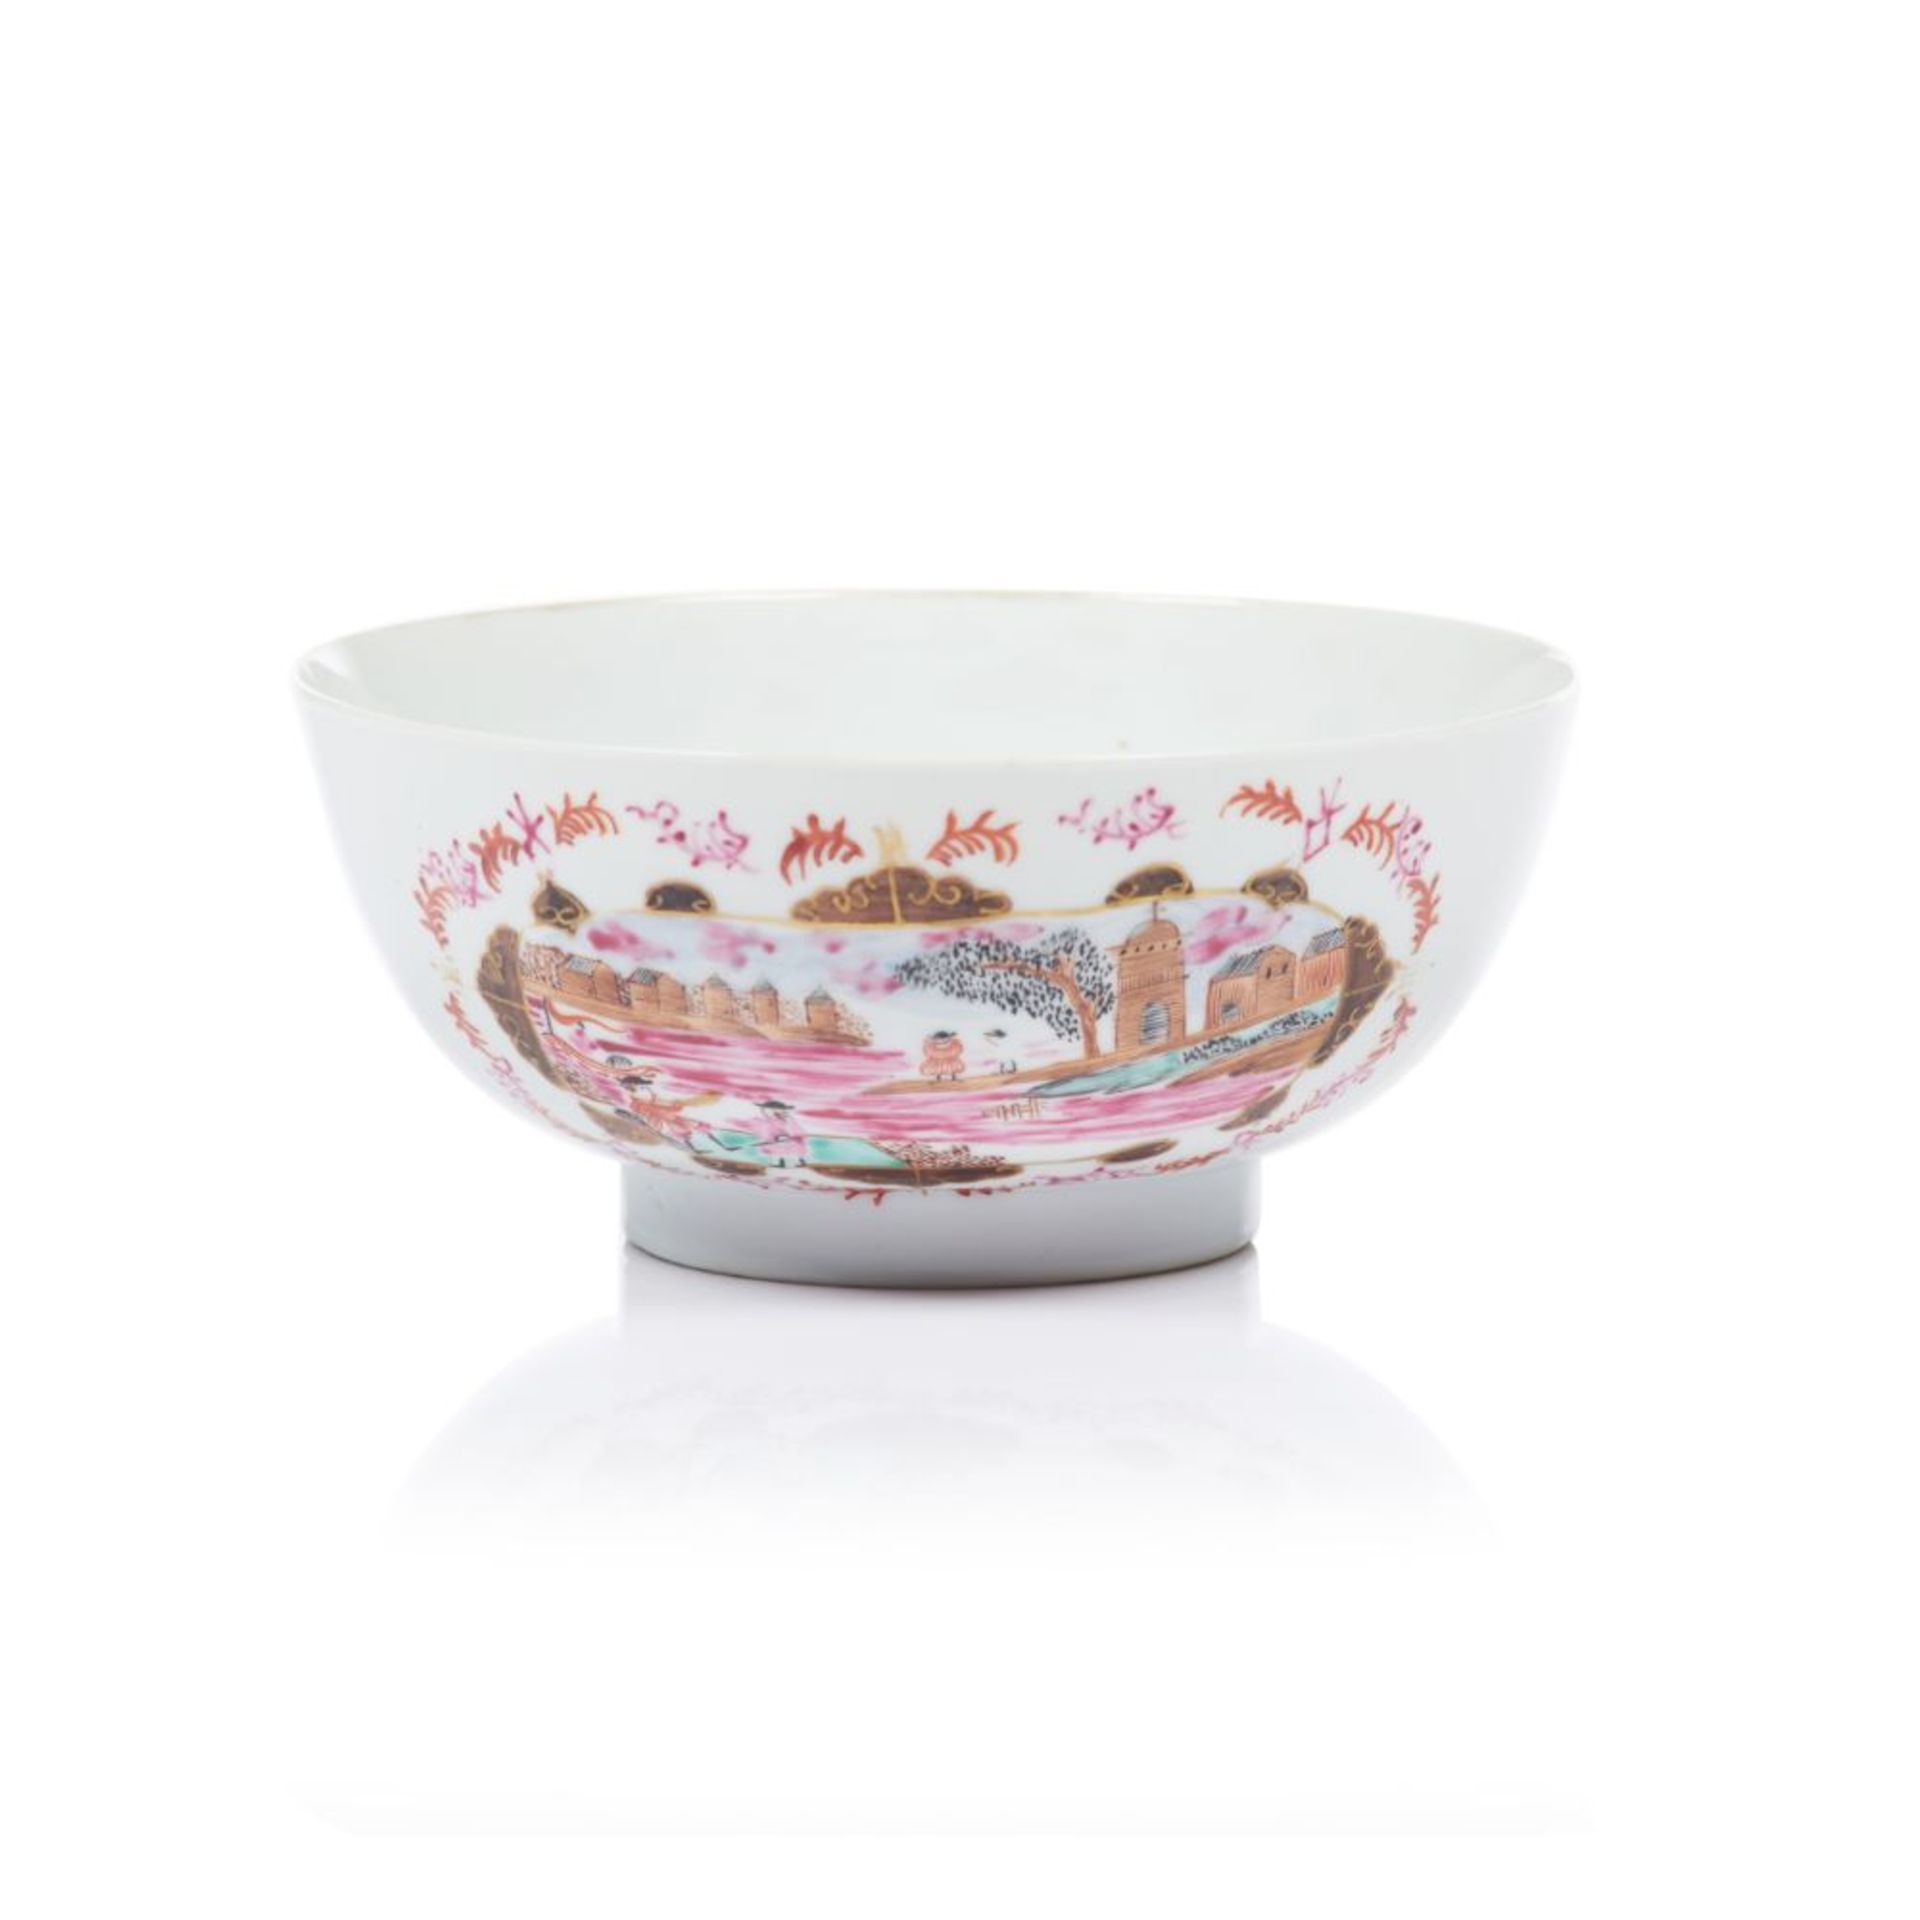 A bowl, Chinese export porcelain, Meissen style polychrome "Famille Rose" enamelled decoration of